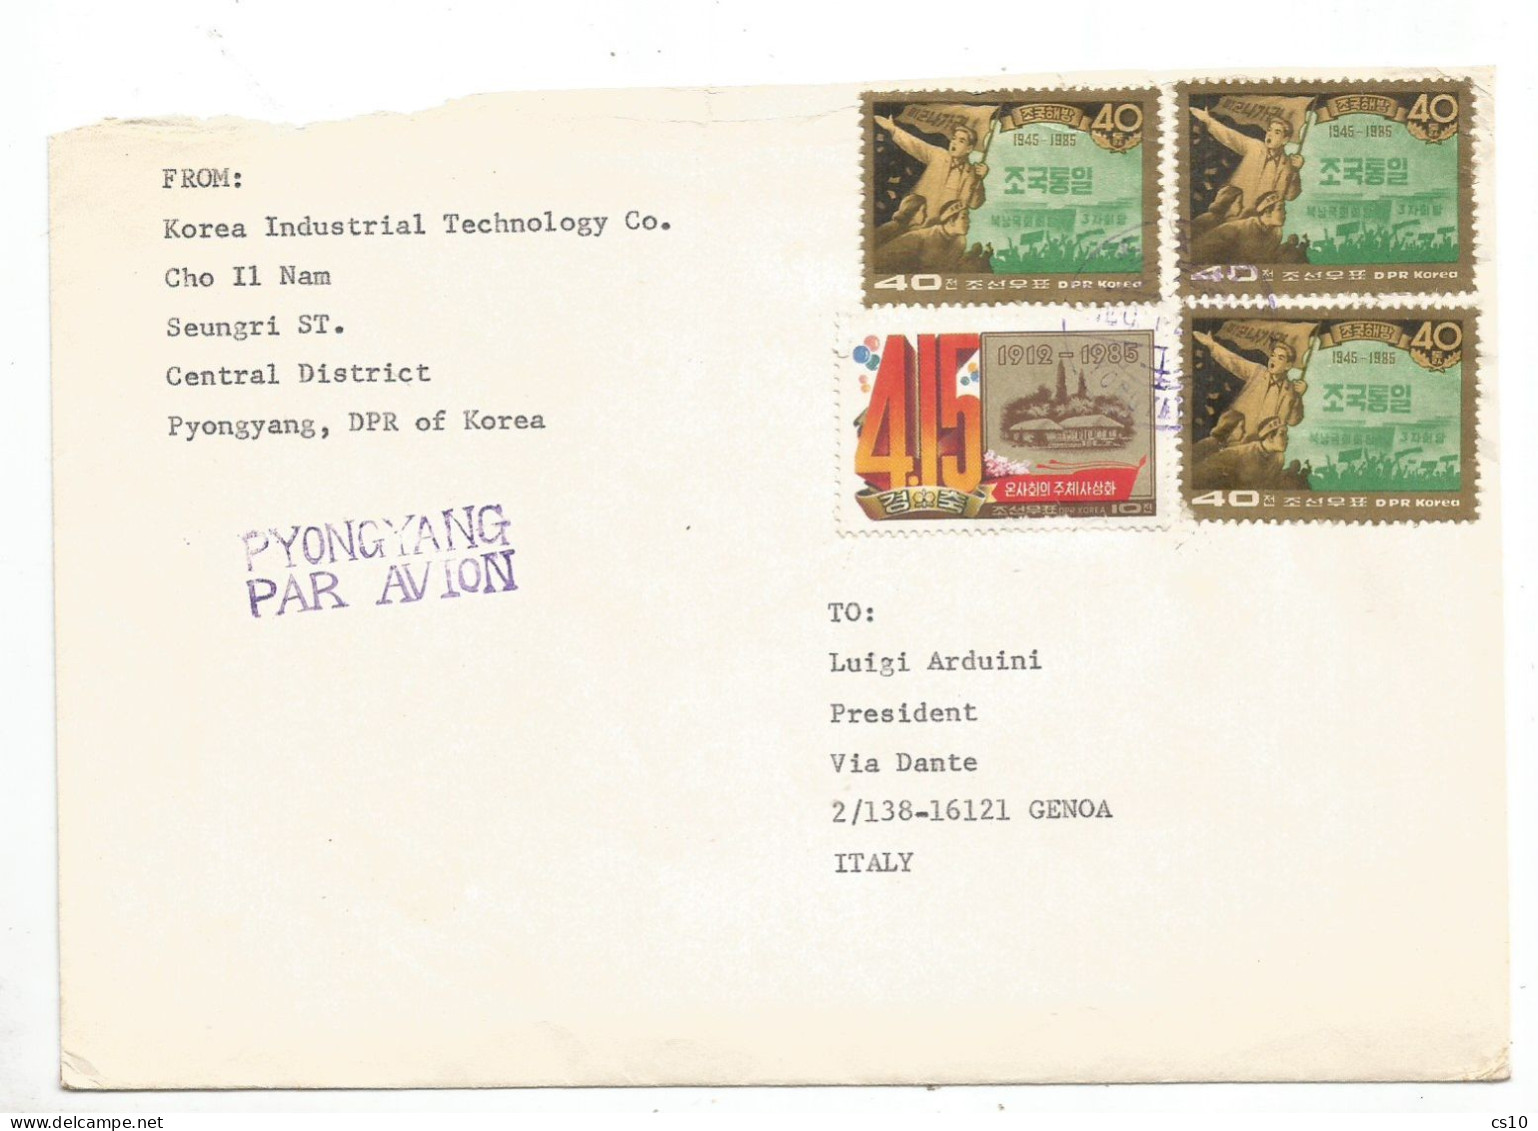 NORTH KOREA REAL MAIL : OFFICIAL COMMERCE AIR AIL COVER PYONGYANG 12DEC1985 X ITALY With 4 STAMPS !!!!! - Korea, North